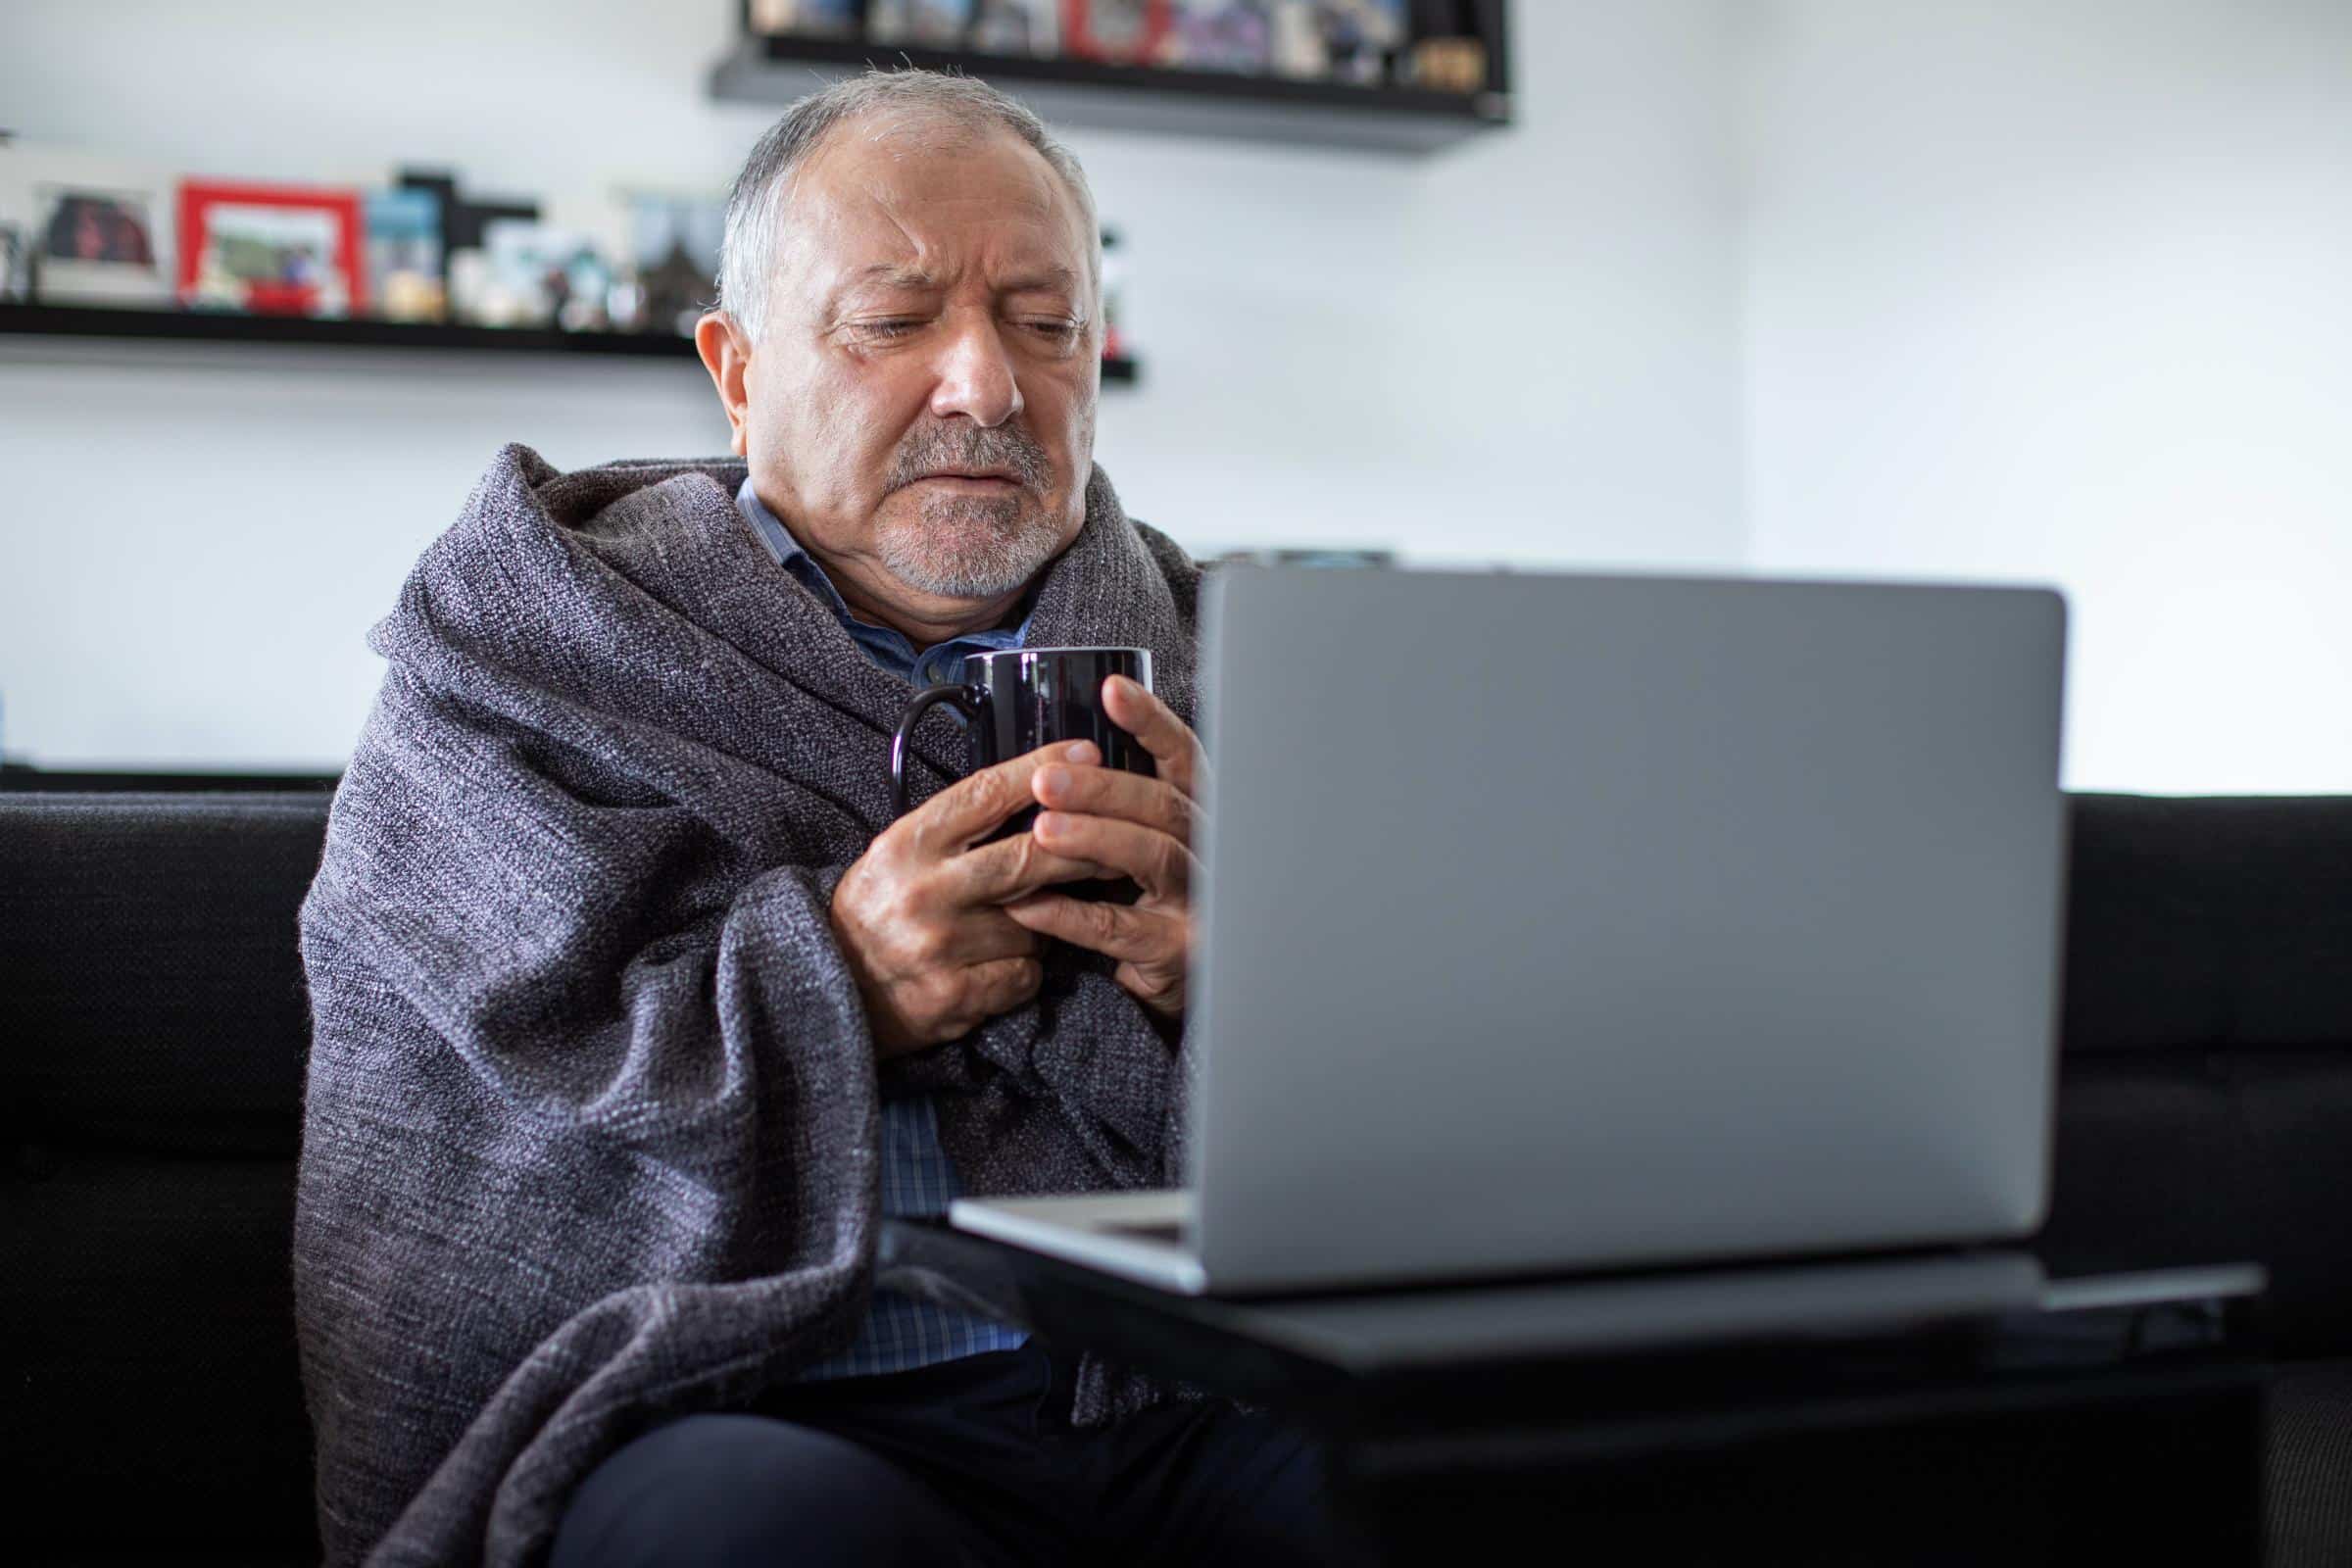 Man wrapped in blanket with laptop